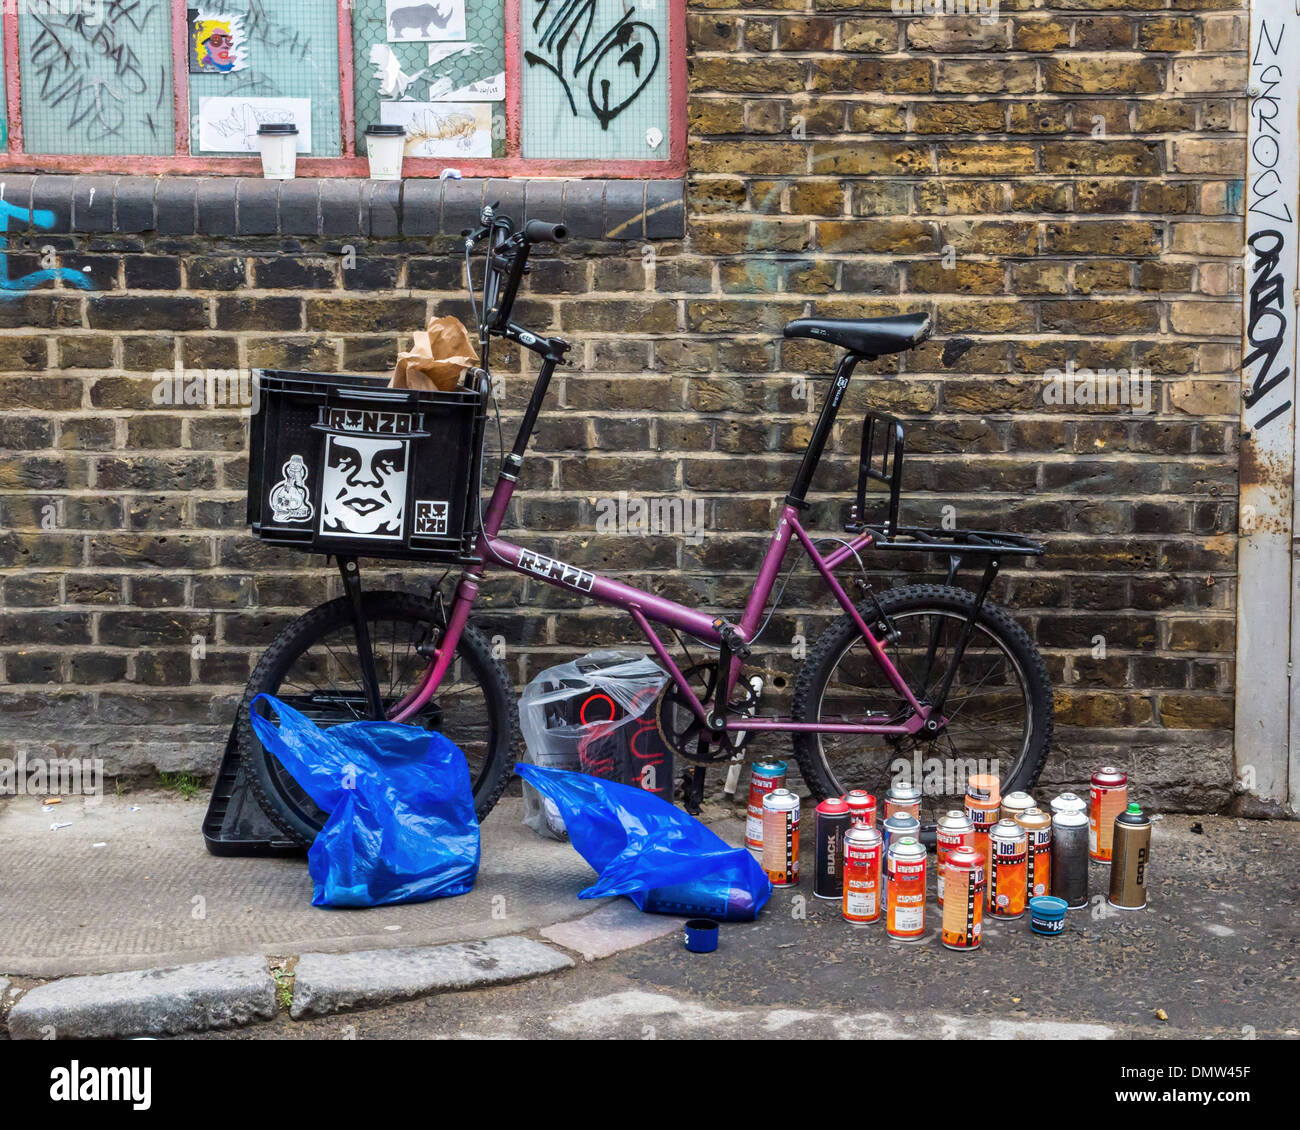 Street artist, Ronzo, at work. The bicycle and spray paints of the graffiti artist  - Fashion Street, London, UK Stock Photo